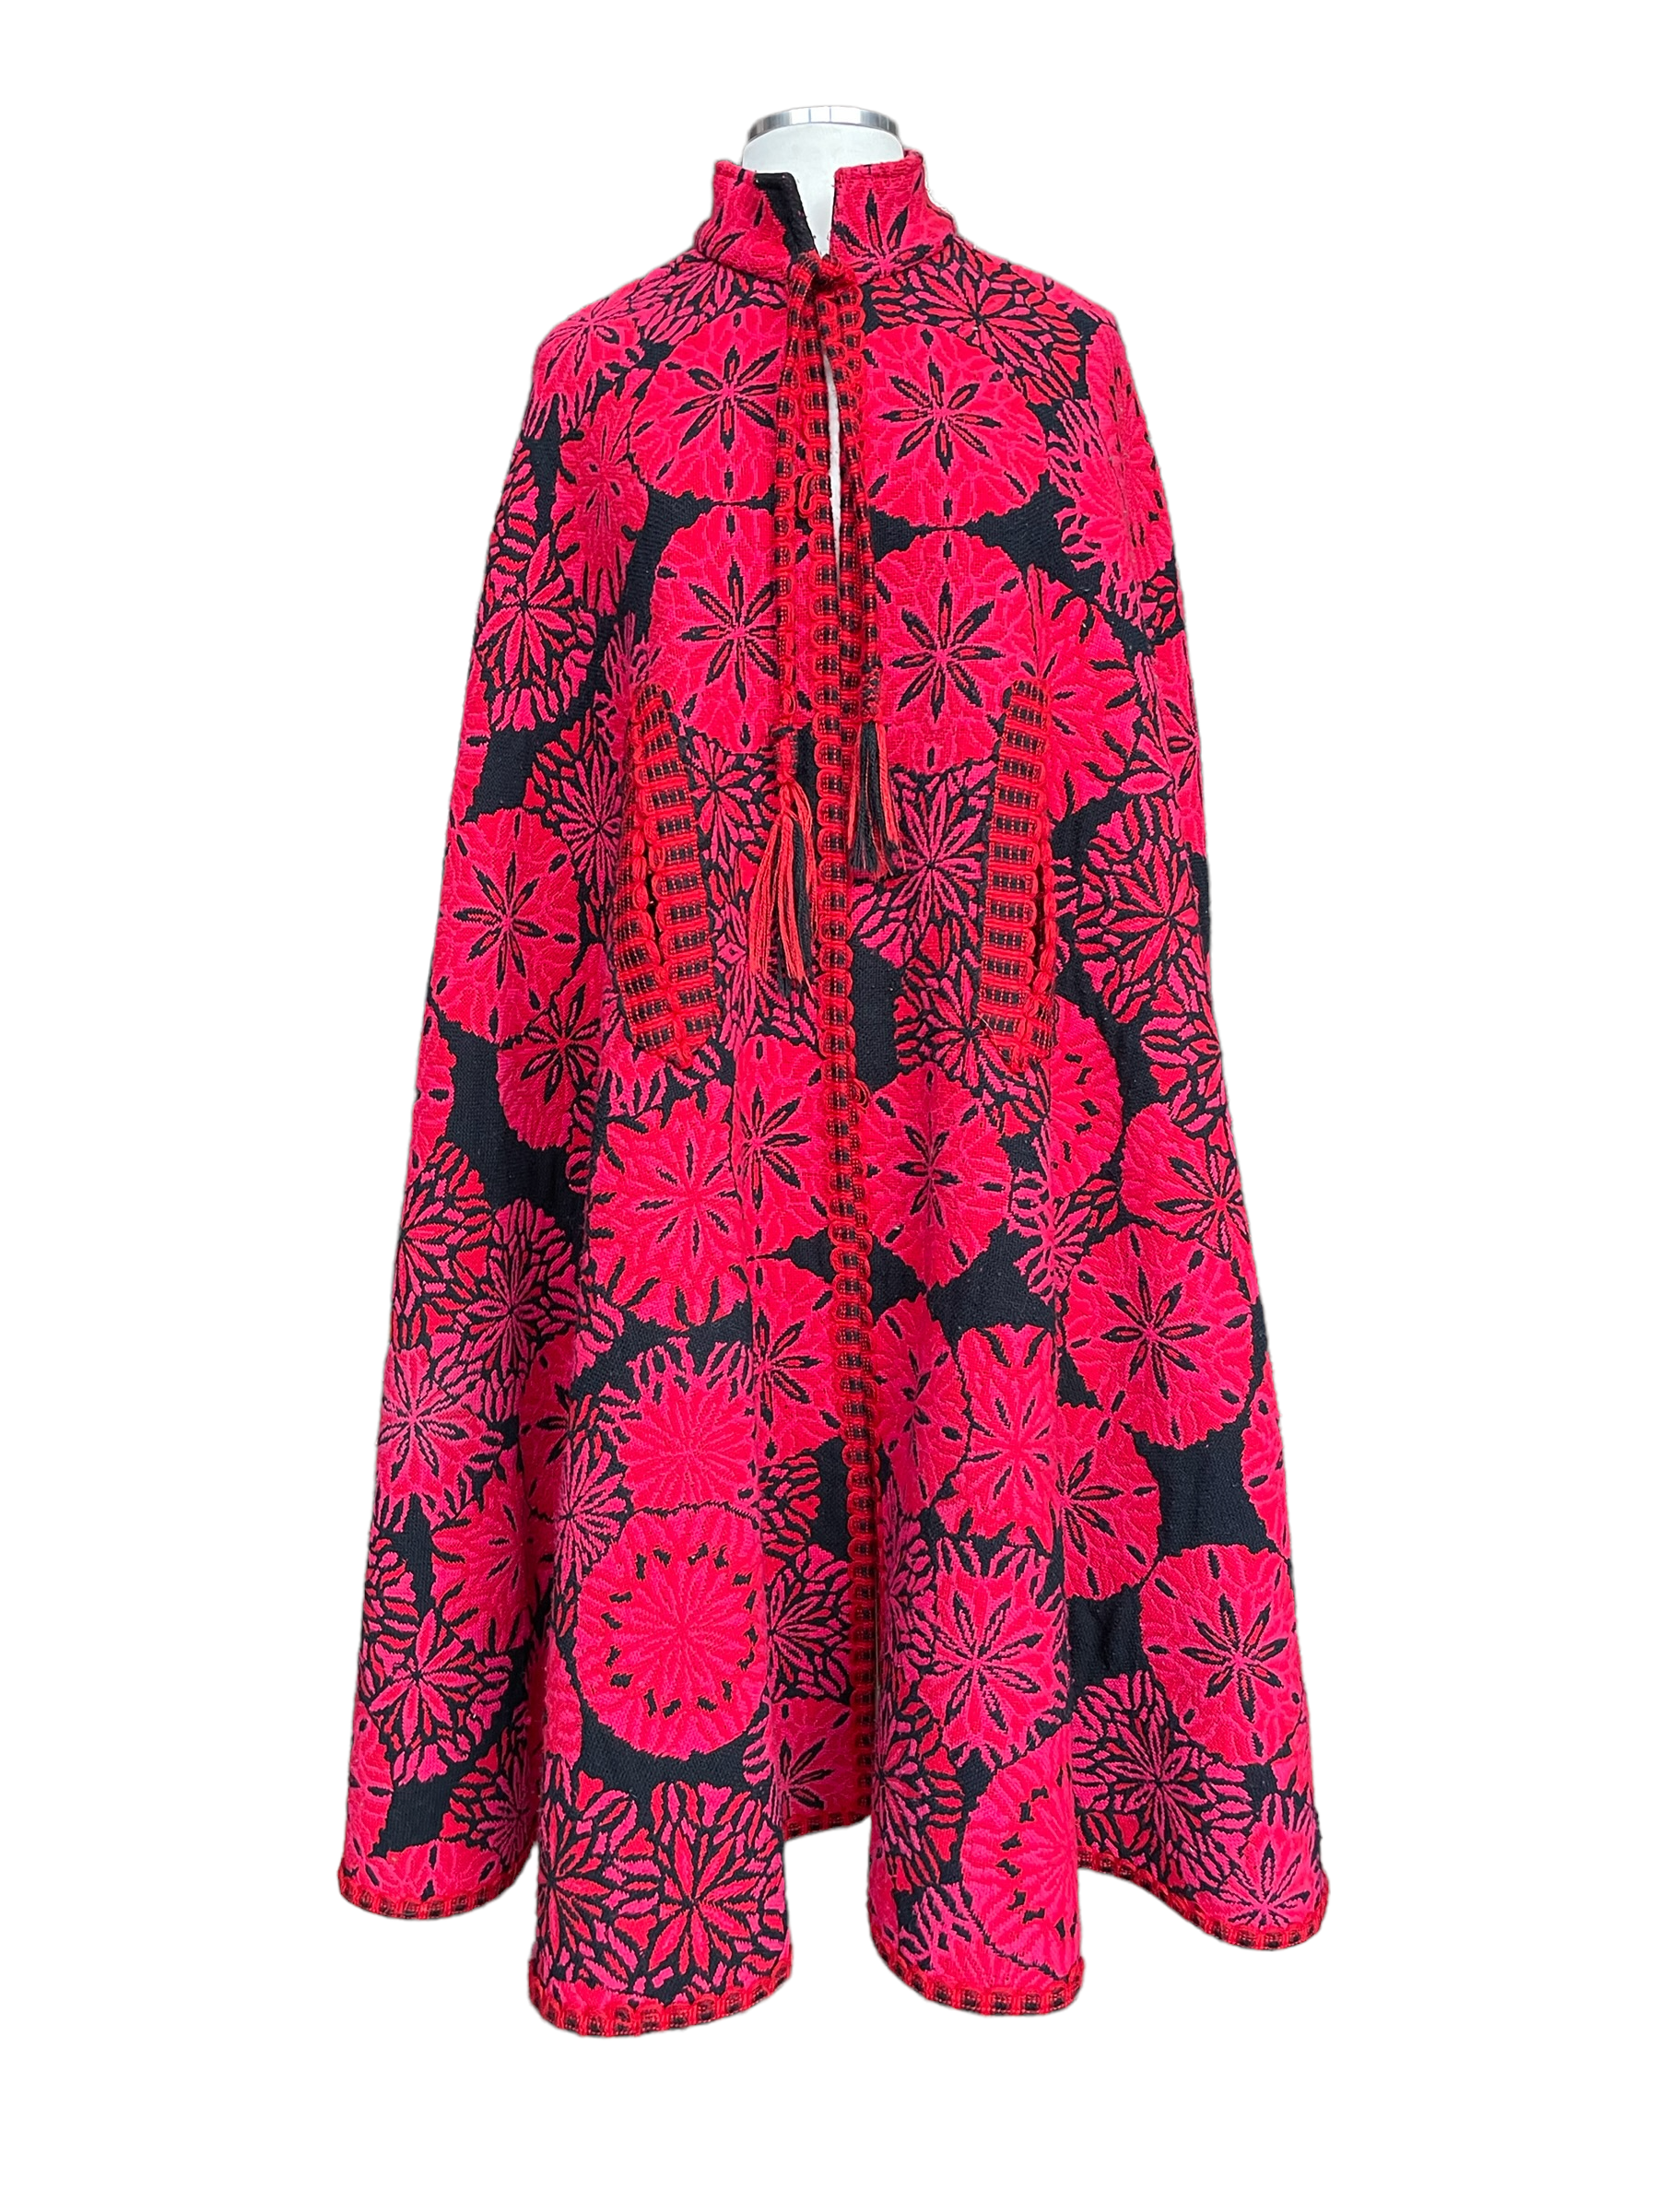 Full front view ofVintage 1960s Arvi Made in Spain Floral Tapestry Cape Coat | Barn Owl Seattle | Seattle True Vintage